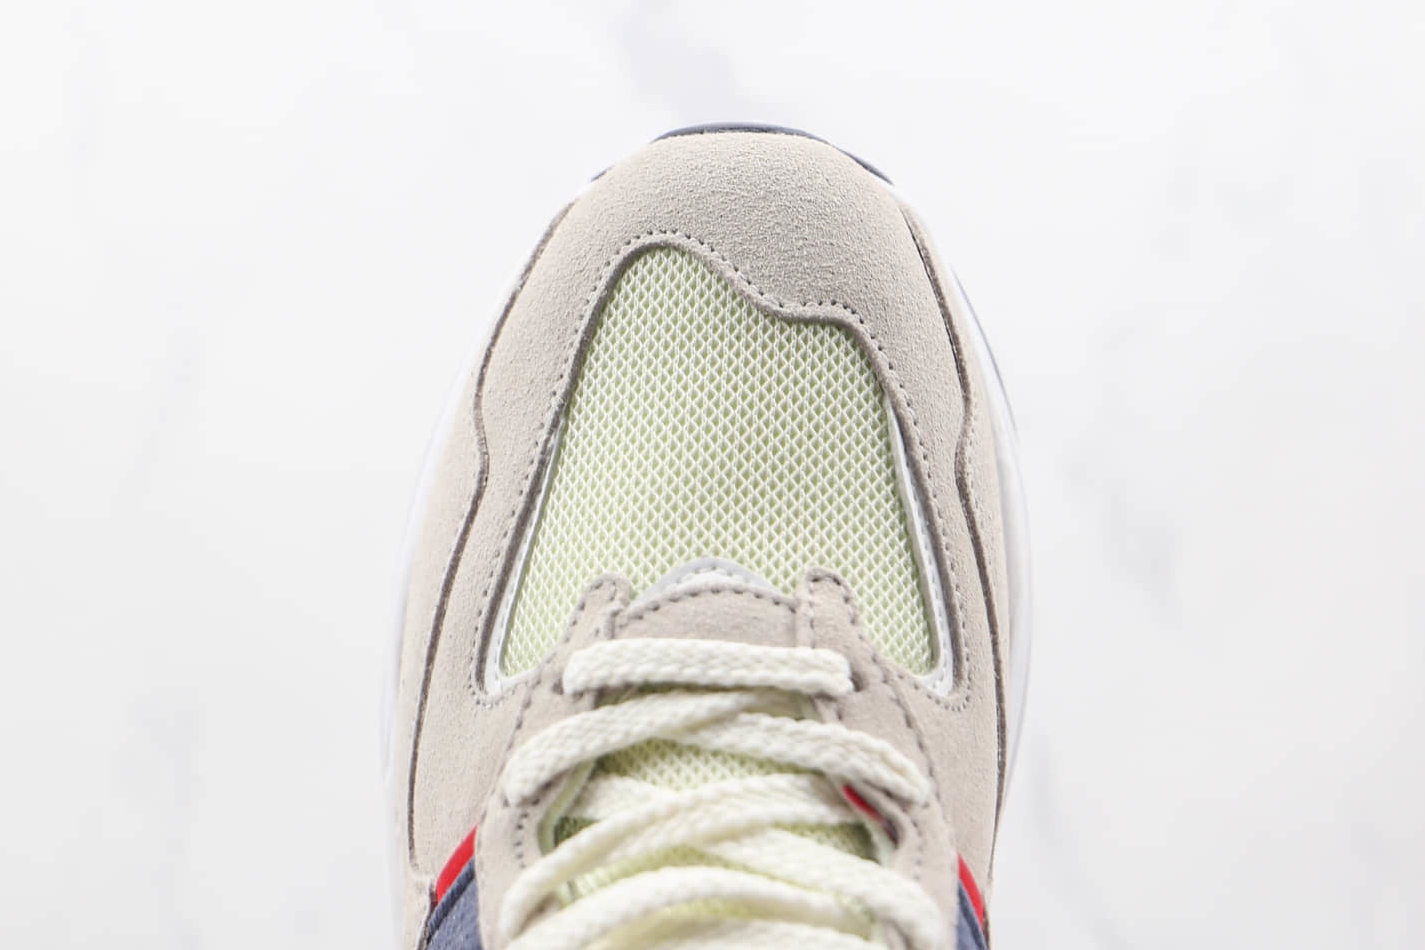 New Balance 57 40 White Navy: High-Quality Stylish Sneakers | Free Shipping